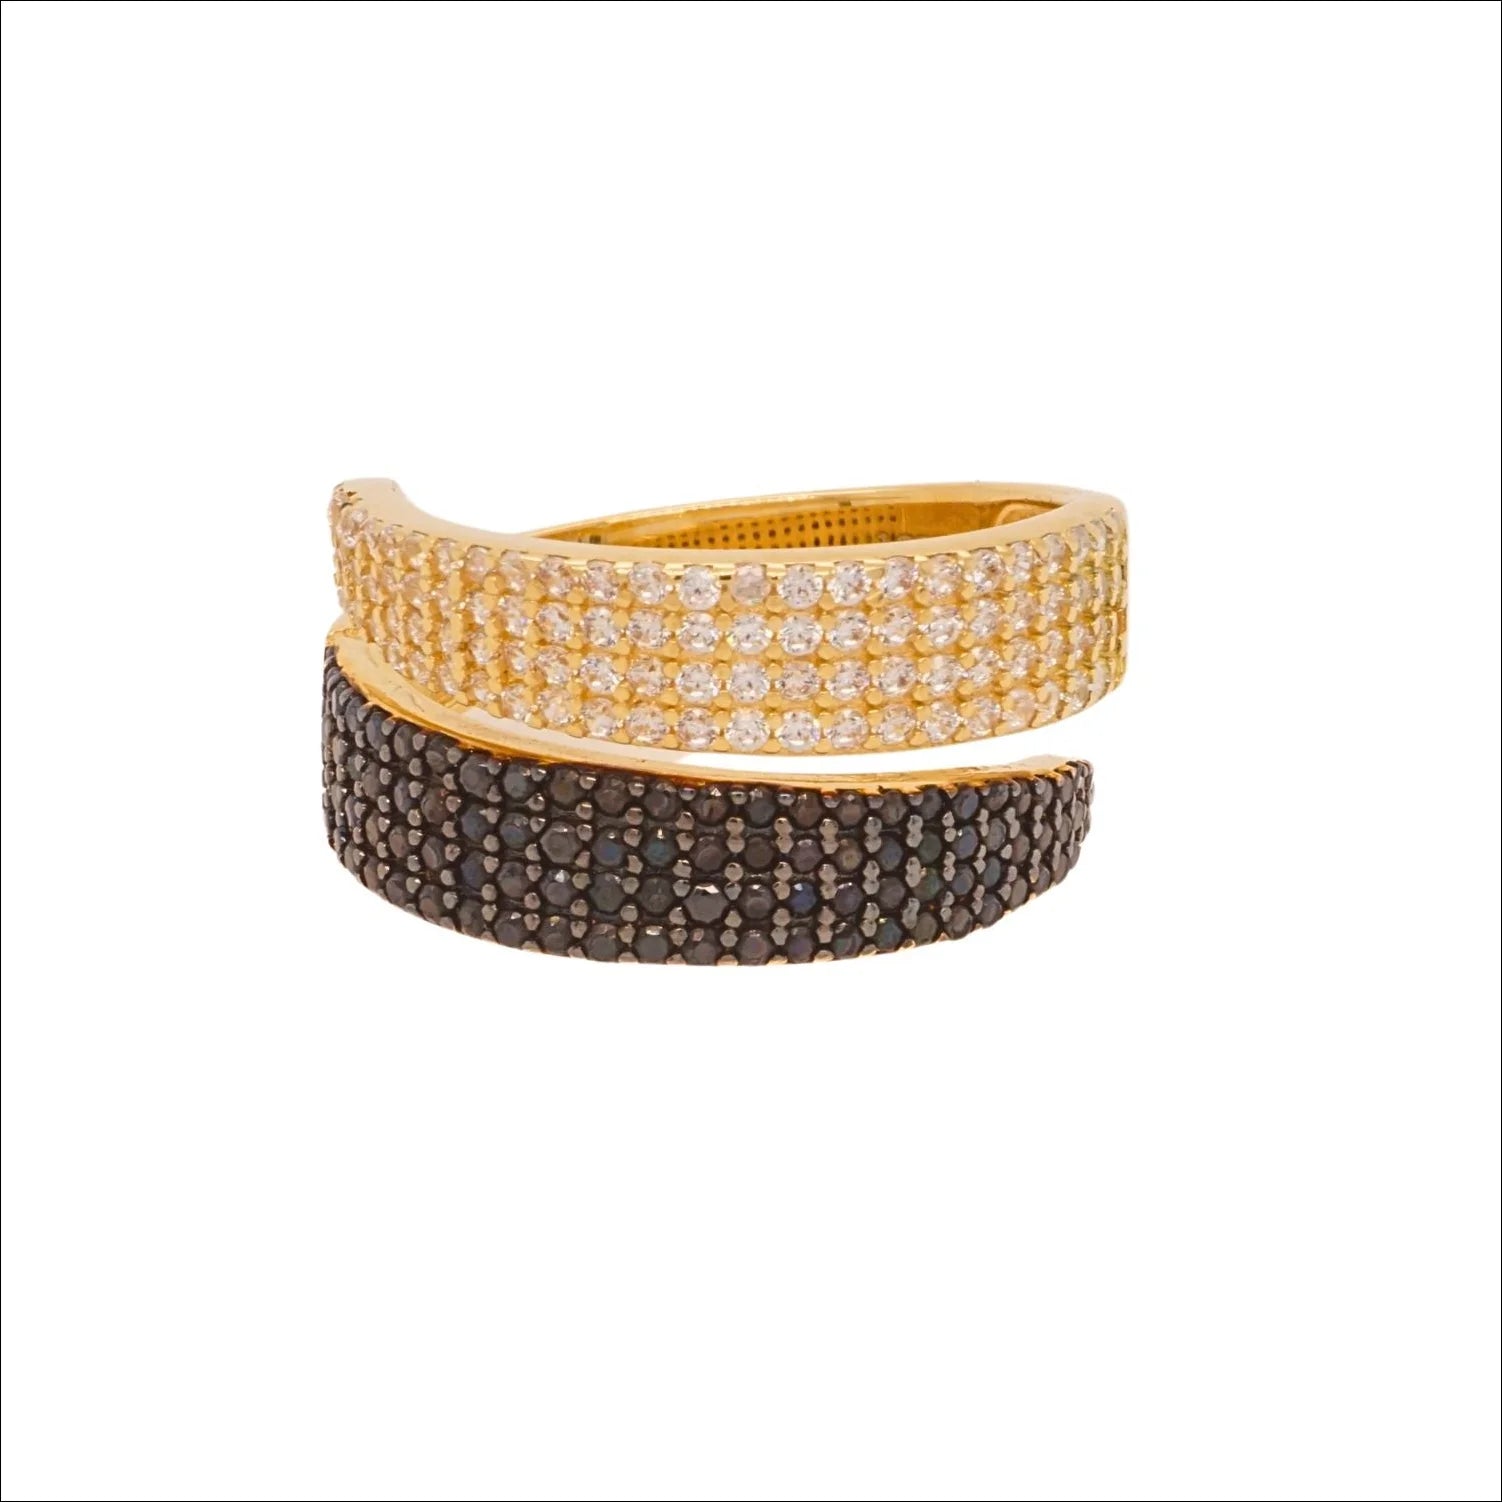 Sophisticated contrast: 18k gold ring with cz | Rings